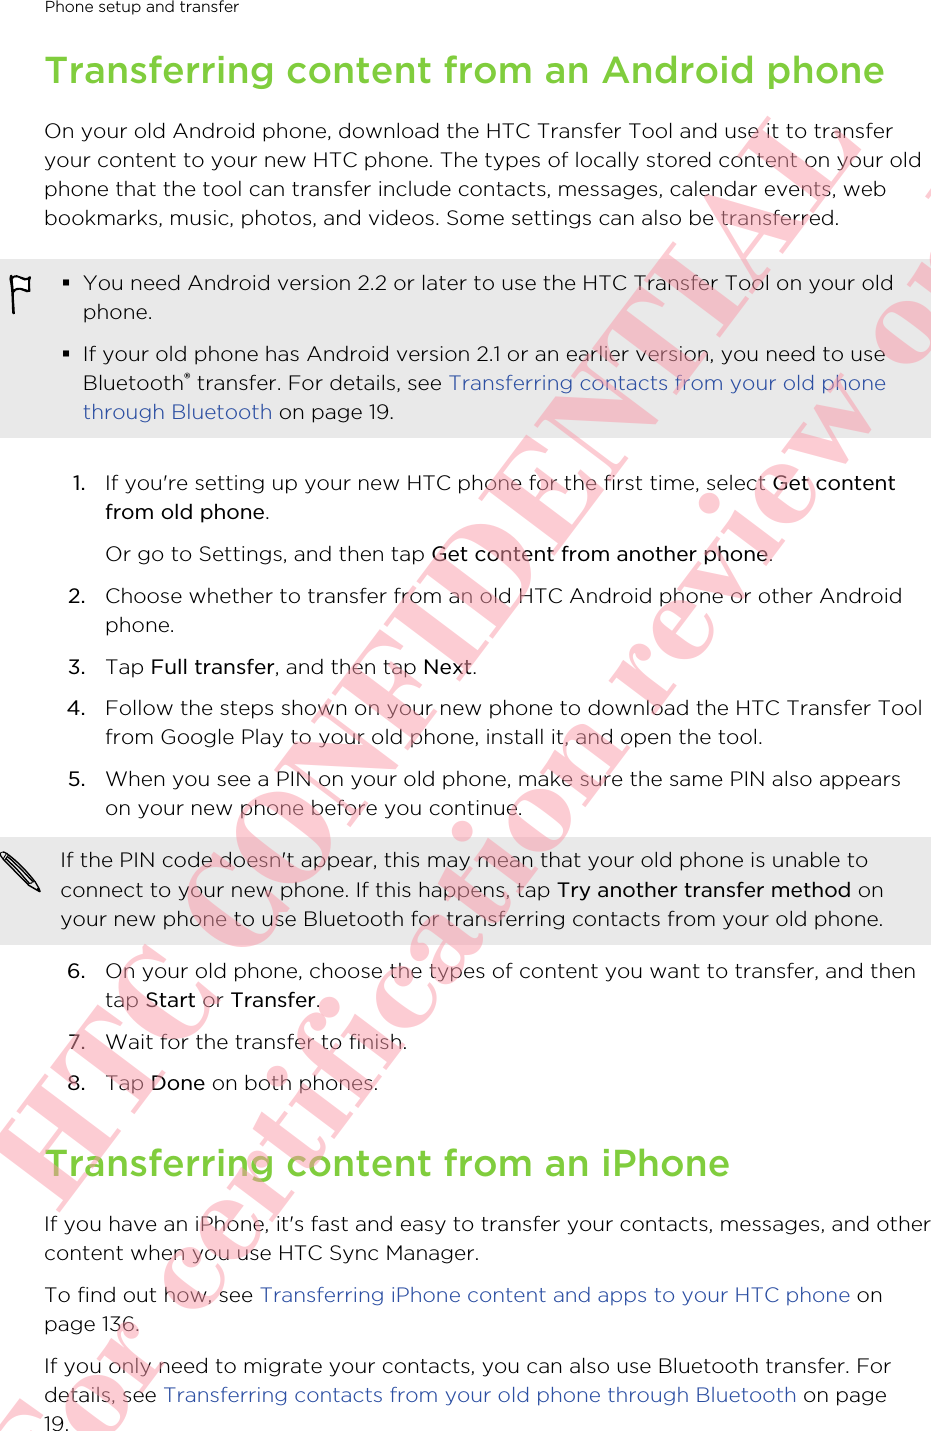 Transferring content from an Android phoneOn your old Android phone, download the HTC Transfer Tool and use it to transferyour content to your new HTC phone. The types of locally stored content on your oldphone that the tool can transfer include contacts, messages, calendar events, webbookmarks, music, photos, and videos. Some settings can also be transferred.§You need Android version 2.2 or later to use the HTC Transfer Tool on your oldphone.§If your old phone has Android version 2.1 or an earlier version, you need to useBluetooth® transfer. For details, see Transferring contacts from your old phonethrough Bluetooth on page 19.1. If you&apos;re setting up your new HTC phone for the first time, select Get contentfrom old phone. Or go to Settings, and then tap Get content from another phone.2. Choose whether to transfer from an old HTC Android phone or other Androidphone.3. Tap Full transfer, and then tap Next.4. Follow the steps shown on your new phone to download the HTC Transfer Toolfrom Google Play to your old phone, install it, and open the tool.5. When you see a PIN on your old phone, make sure the same PIN also appearson your new phone before you continue. If the PIN code doesn&apos;t appear, this may mean that your old phone is unable toconnect to your new phone. If this happens, tap Try another transfer method onyour new phone to use Bluetooth for transferring contacts from your old phone.6. On your old phone, choose the types of content you want to transfer, and thentap Start or Transfer.7. Wait for the transfer to finish.8. Tap Done on both phones.Transferring content from an iPhoneIf you have an iPhone, it&apos;s fast and easy to transfer your contacts, messages, and othercontent when you use HTC Sync Manager.To find out how, see Transferring iPhone content and apps to your HTC phone onpage 136.If you only need to migrate your contacts, you can also use Bluetooth transfer. Fordetails, see Transferring contacts from your old phone through Bluetooth on page19.Phone setup and transfer       HTC CONFIDENTIAL For certification review only